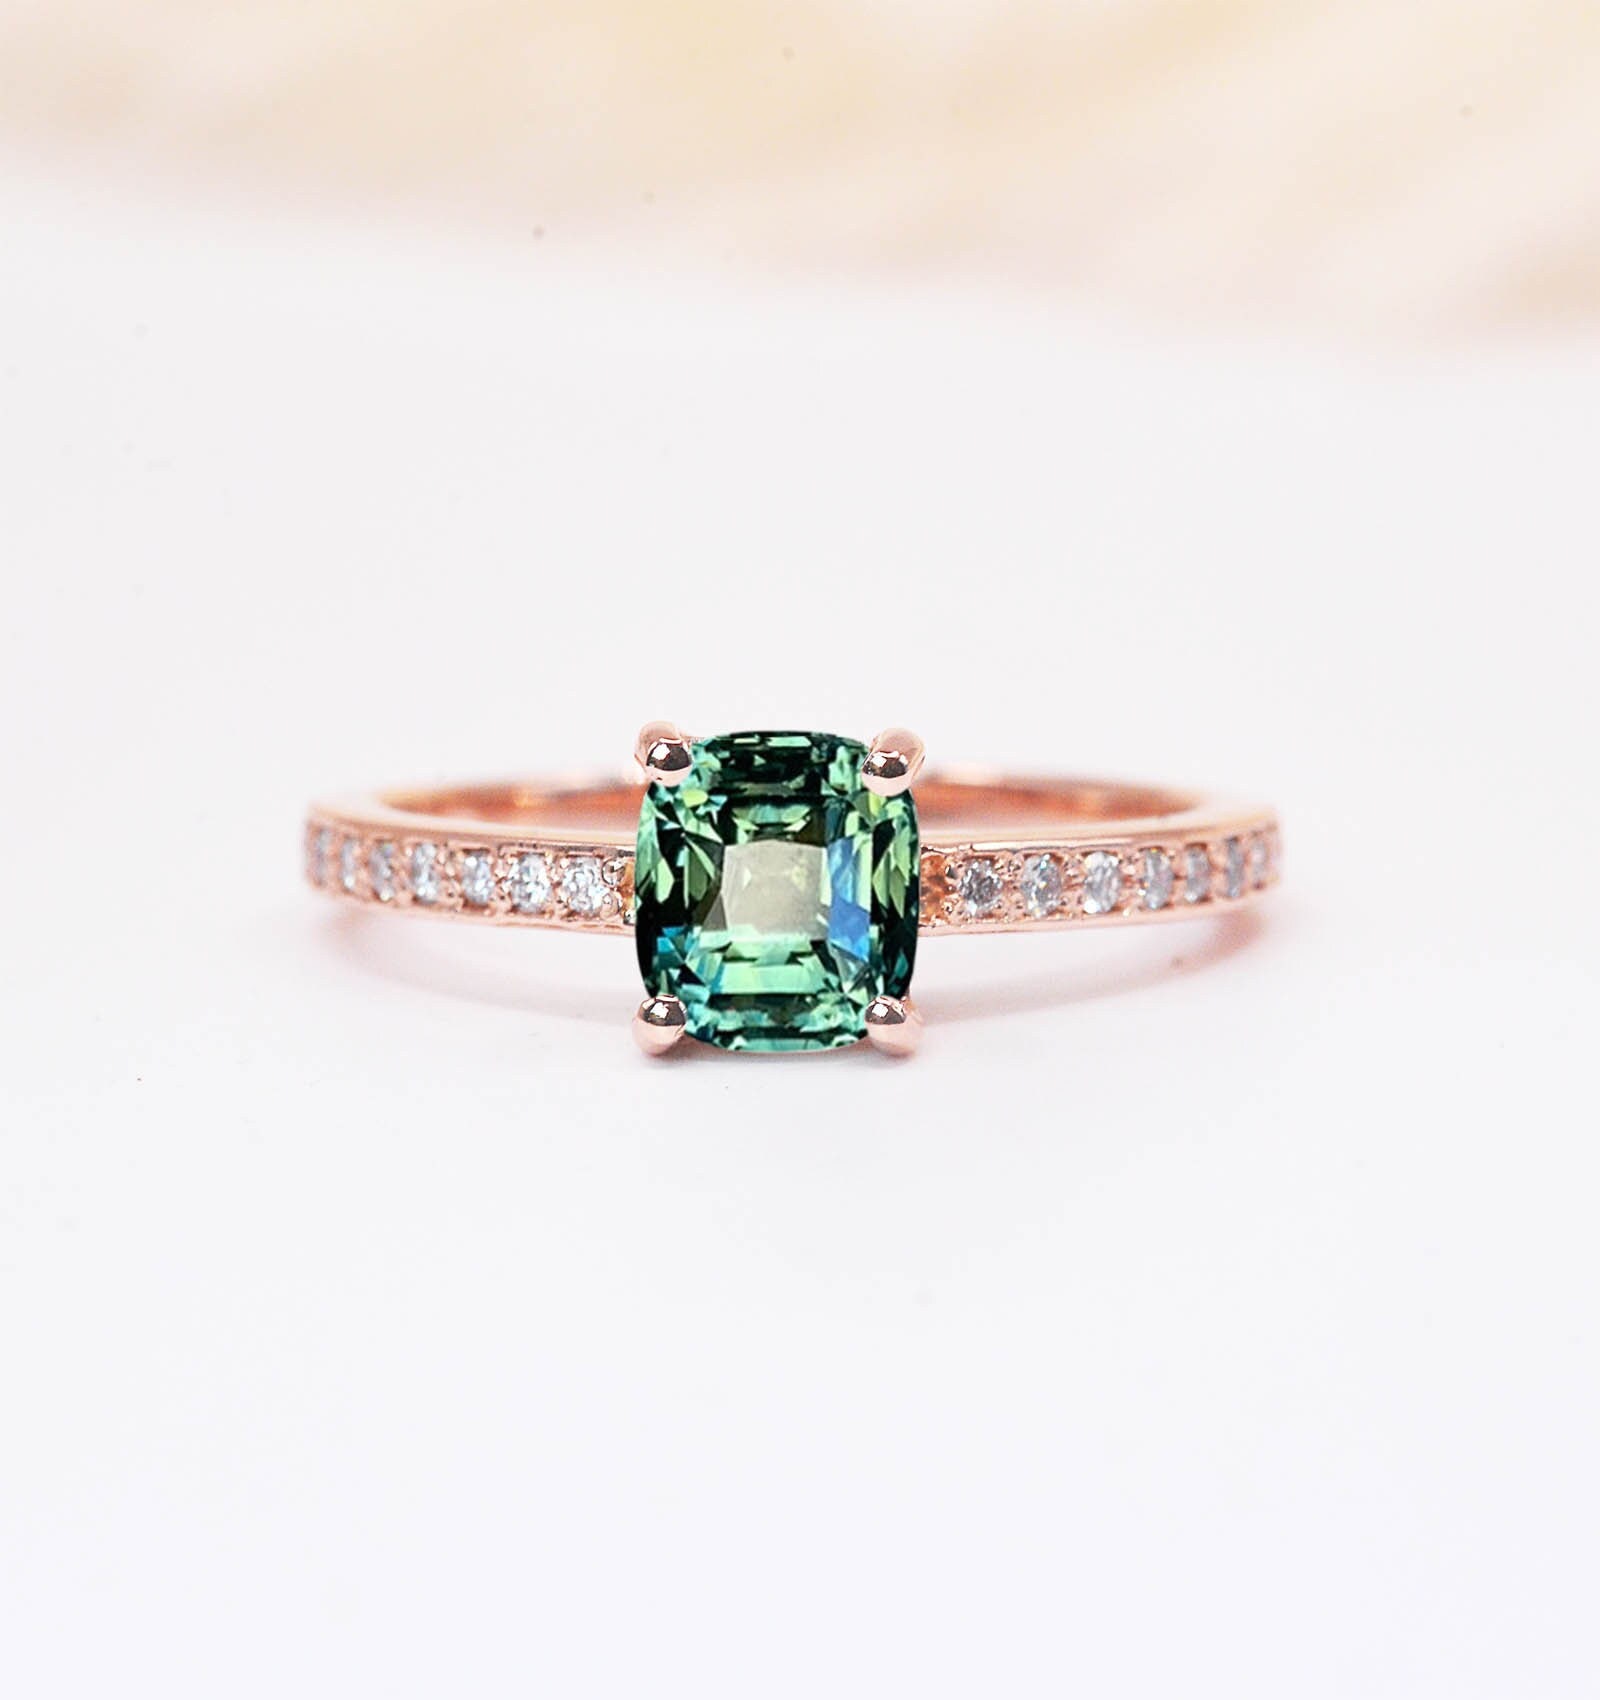 Teal Sapphire & Diamond Vintage Ring | 6mm Cushion Cut Teal Engagement Stylish White